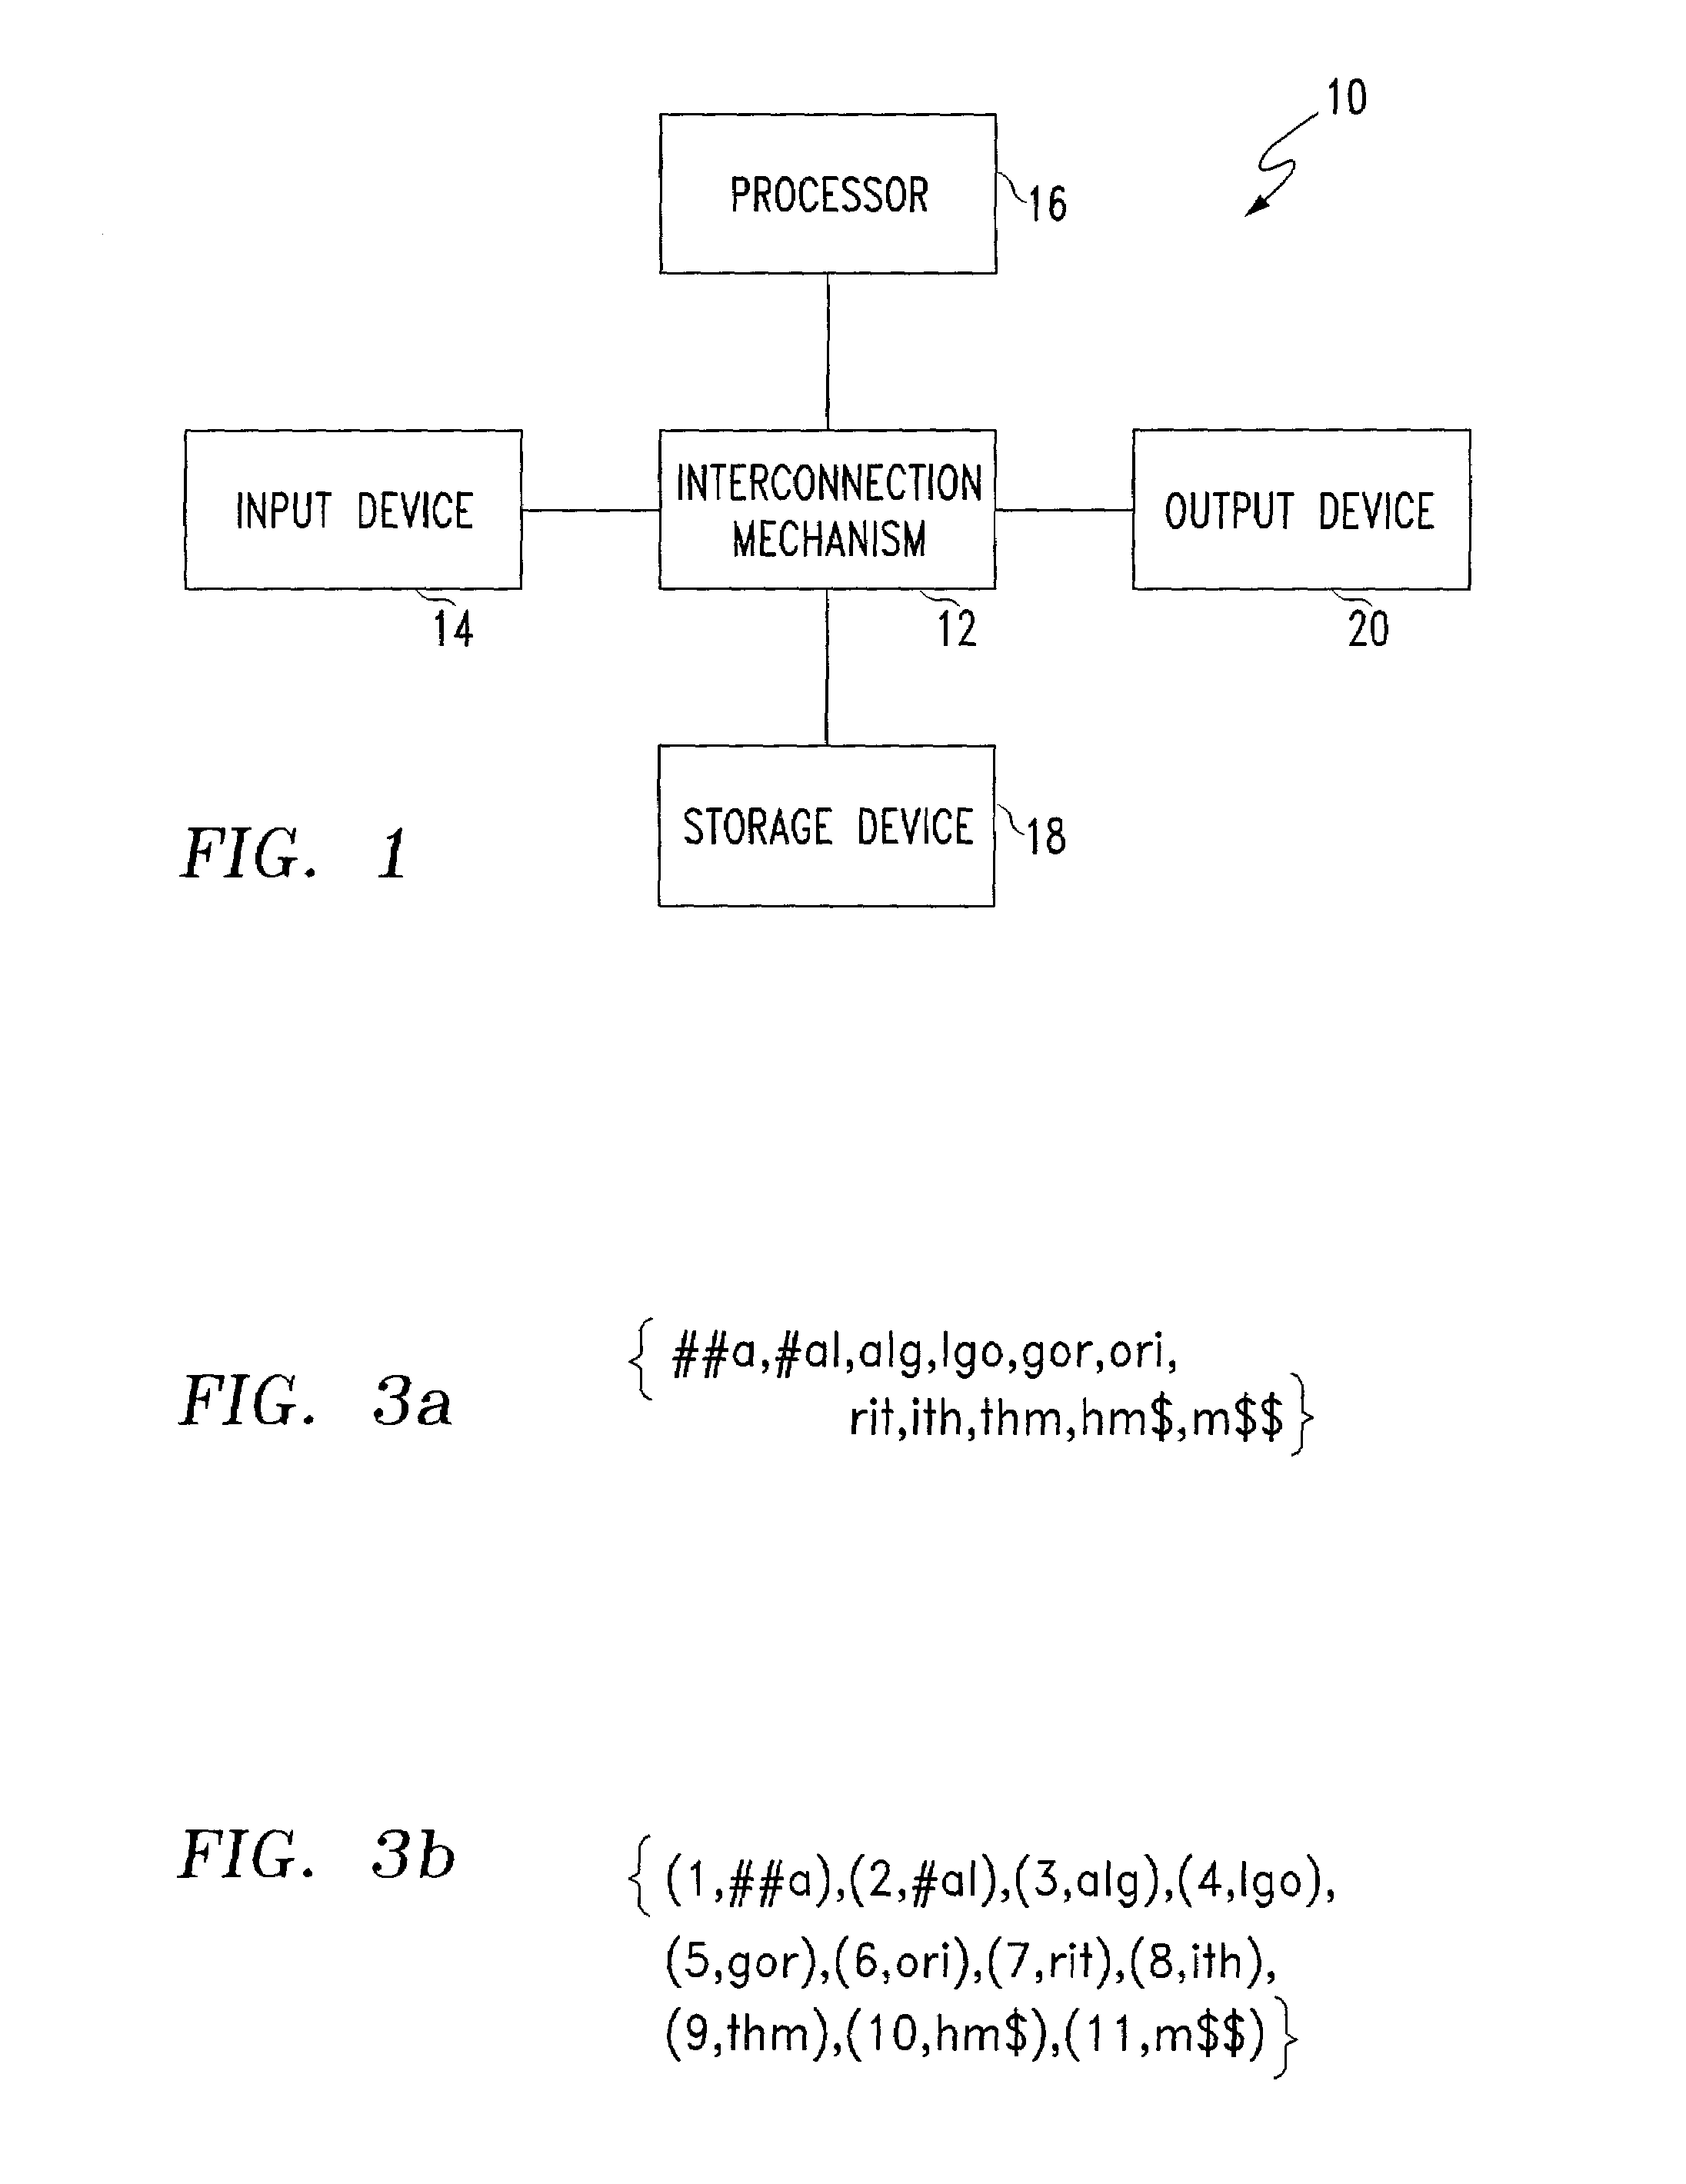 Method of performing approximate substring indexing